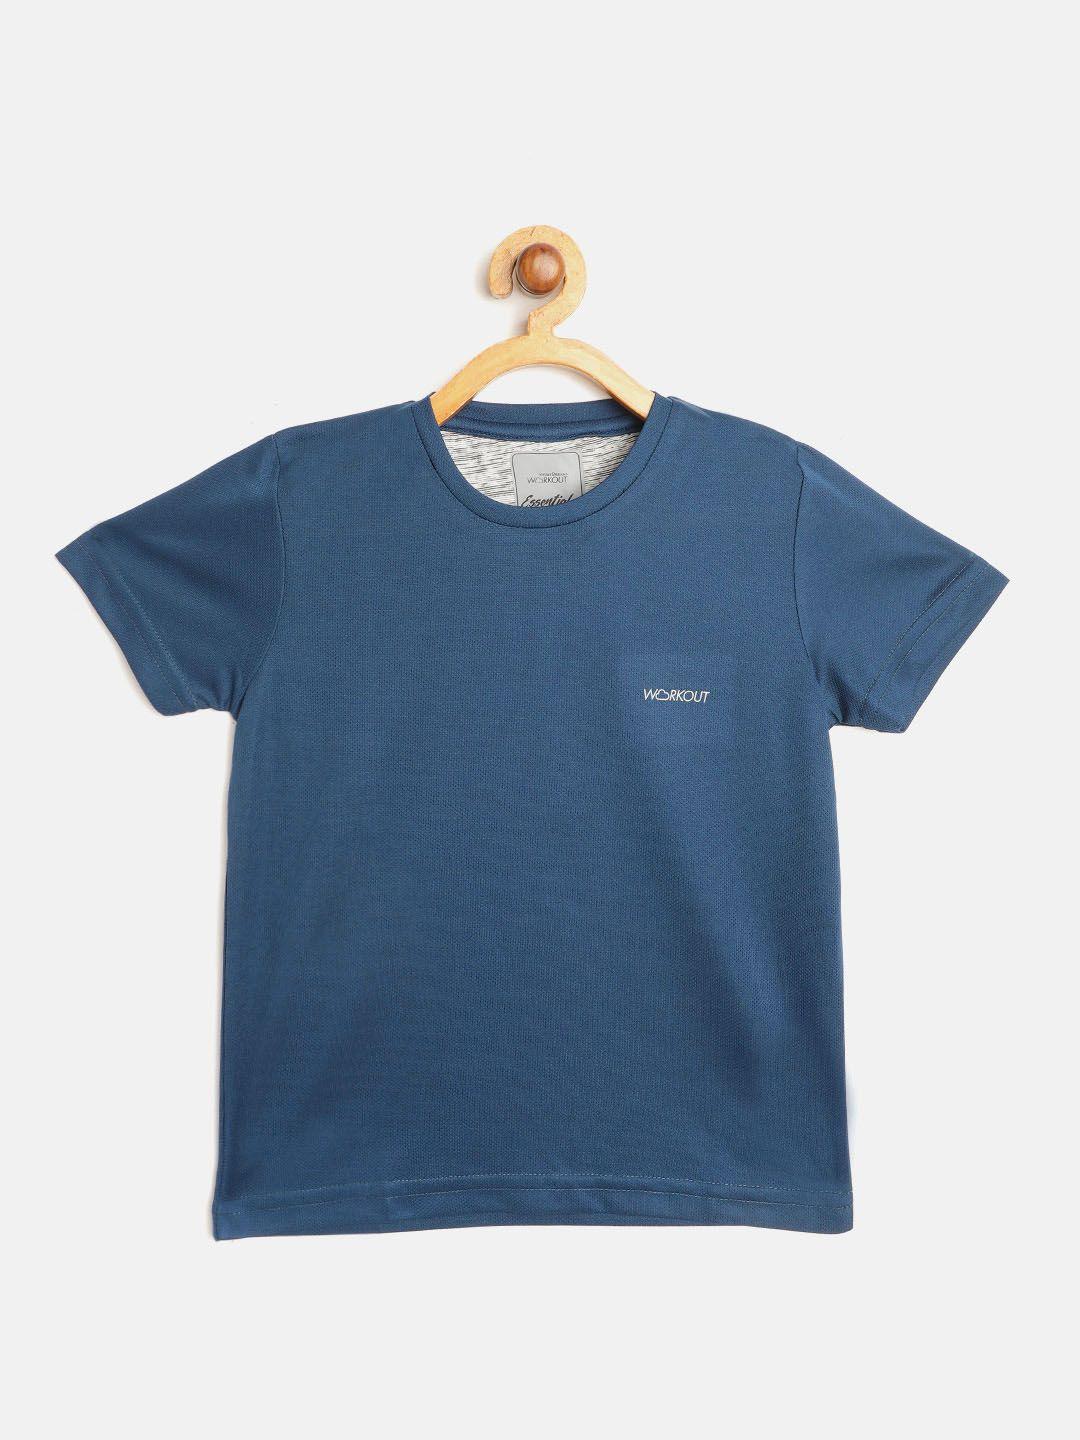 Sweet Dreams Boys Teal Blue Solid Round Neck Workout T-shirt